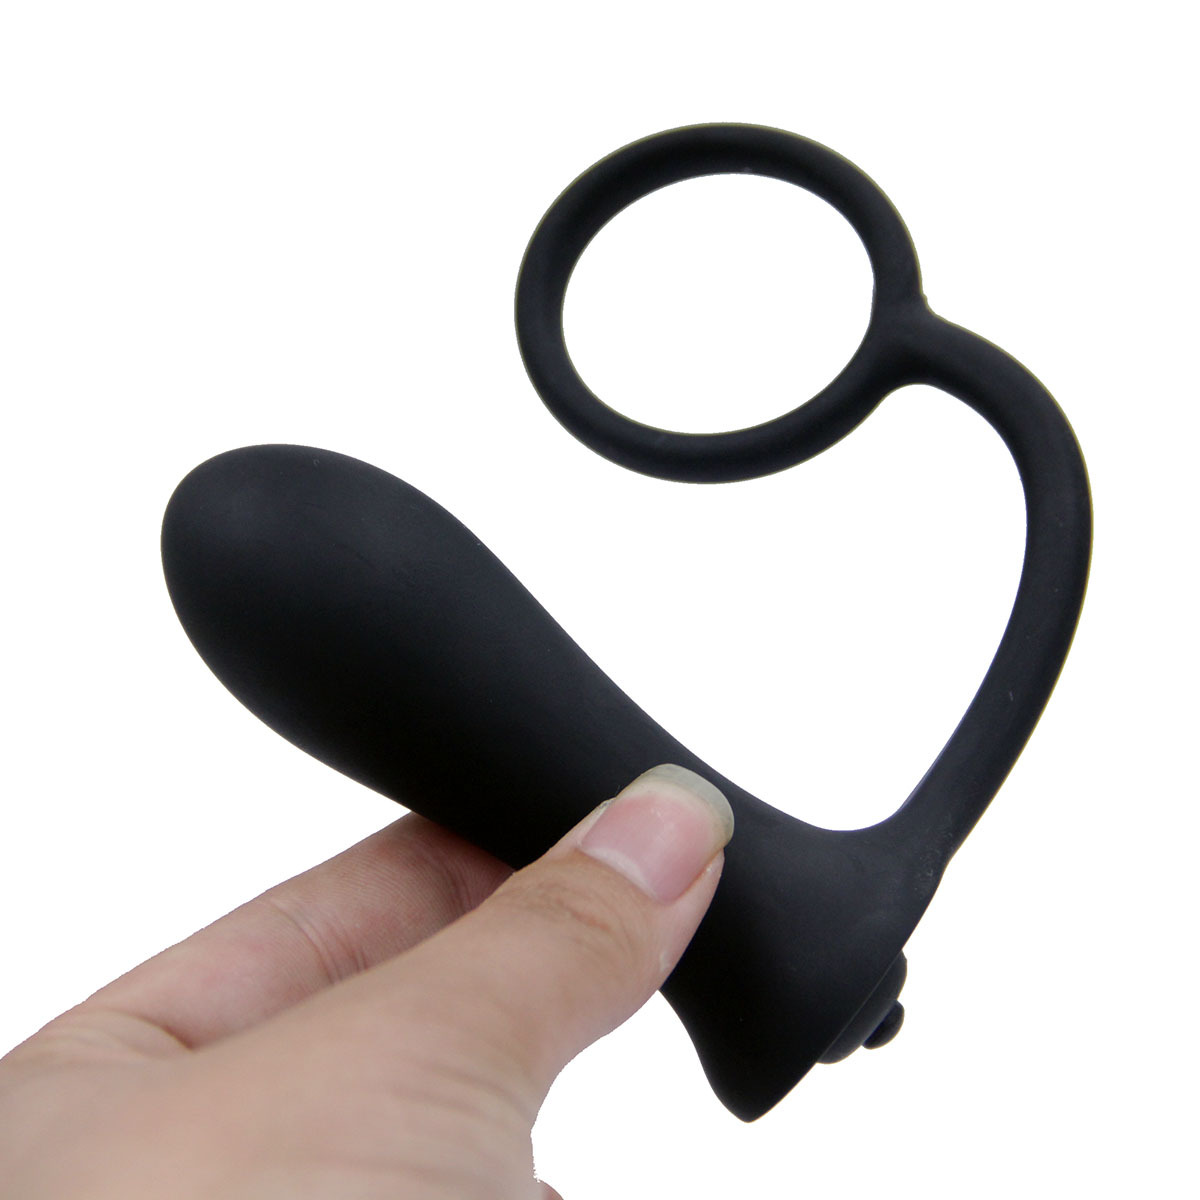 New 10 frequency vibration, silicone wearing anal plug for men and women